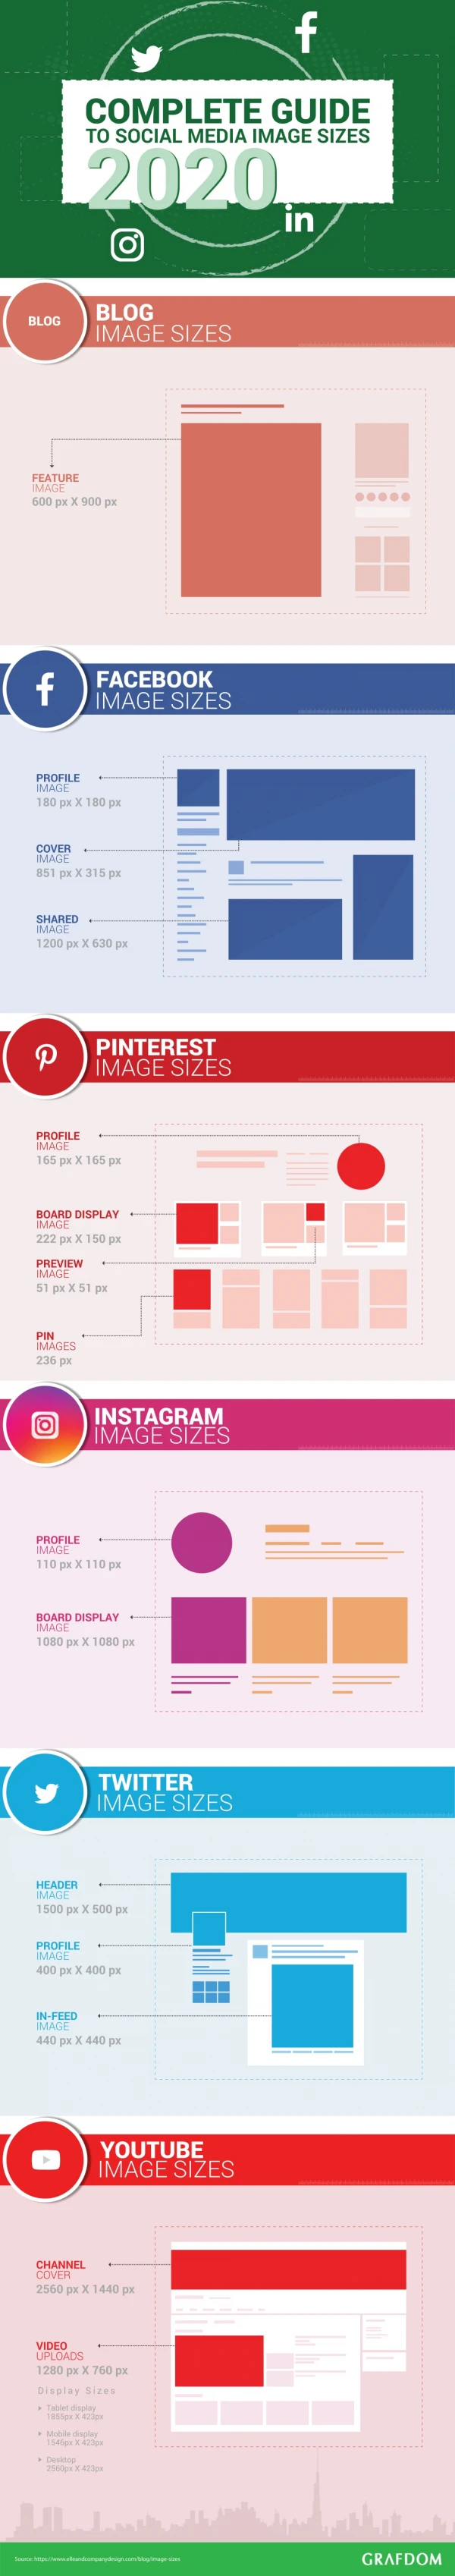 Social Media Image Sizes – Cheat Sheet (2020 Complete)